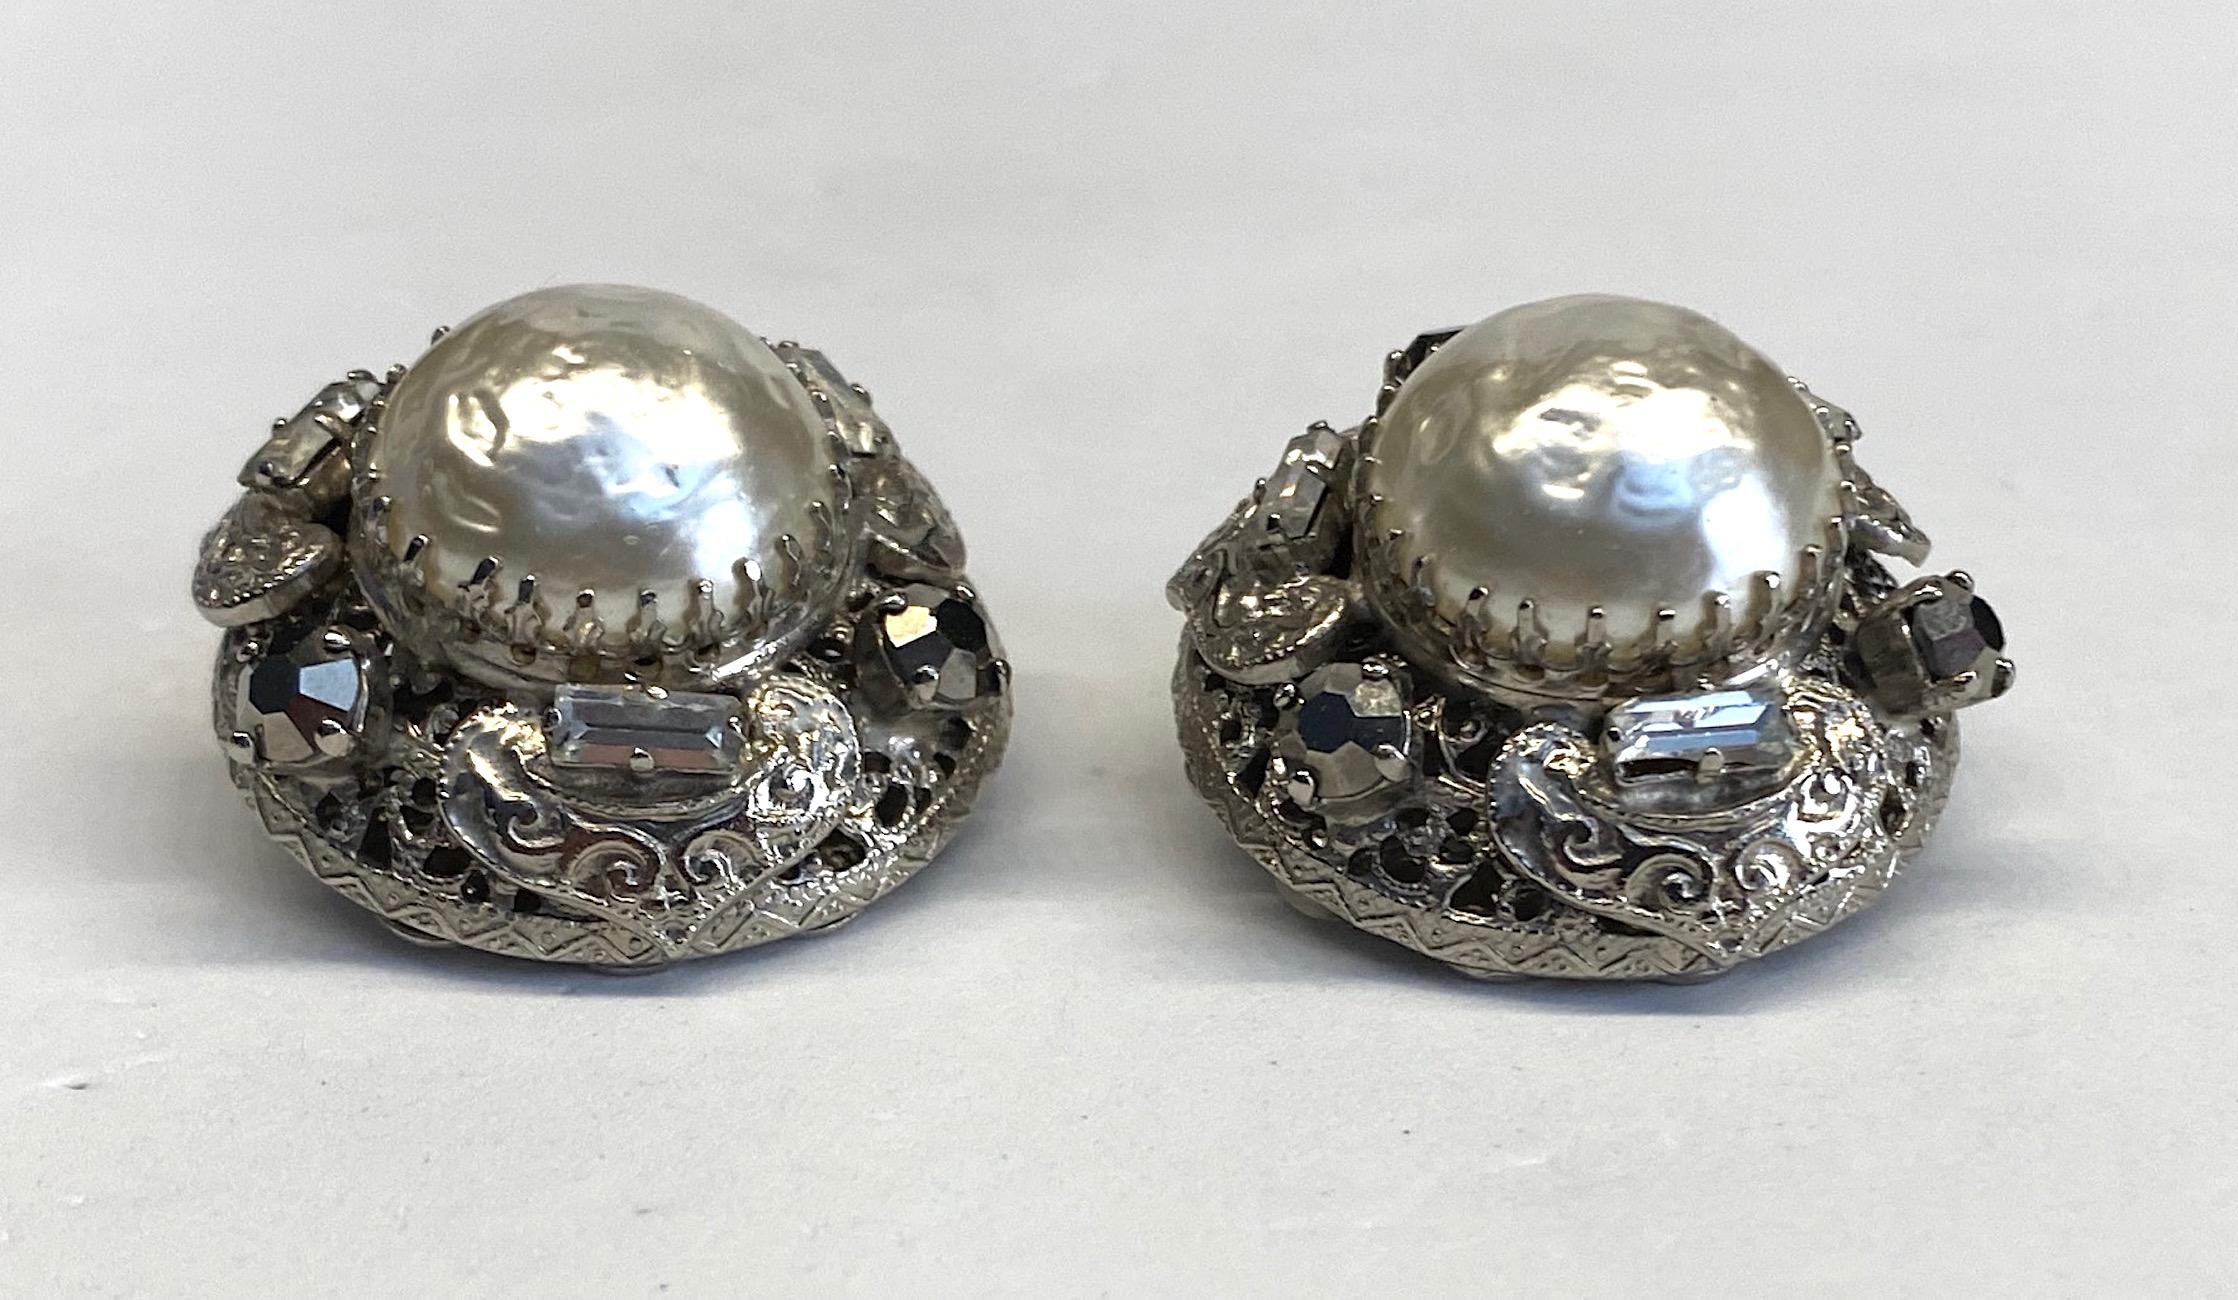 A beautifully made pair of unsigned Gianni De Liguoro large button earrings. The earrings are hand constructed with a dome shape front and a lace disk back. The use of the openwork lace findings are typical and unique of De Liguoro construction.